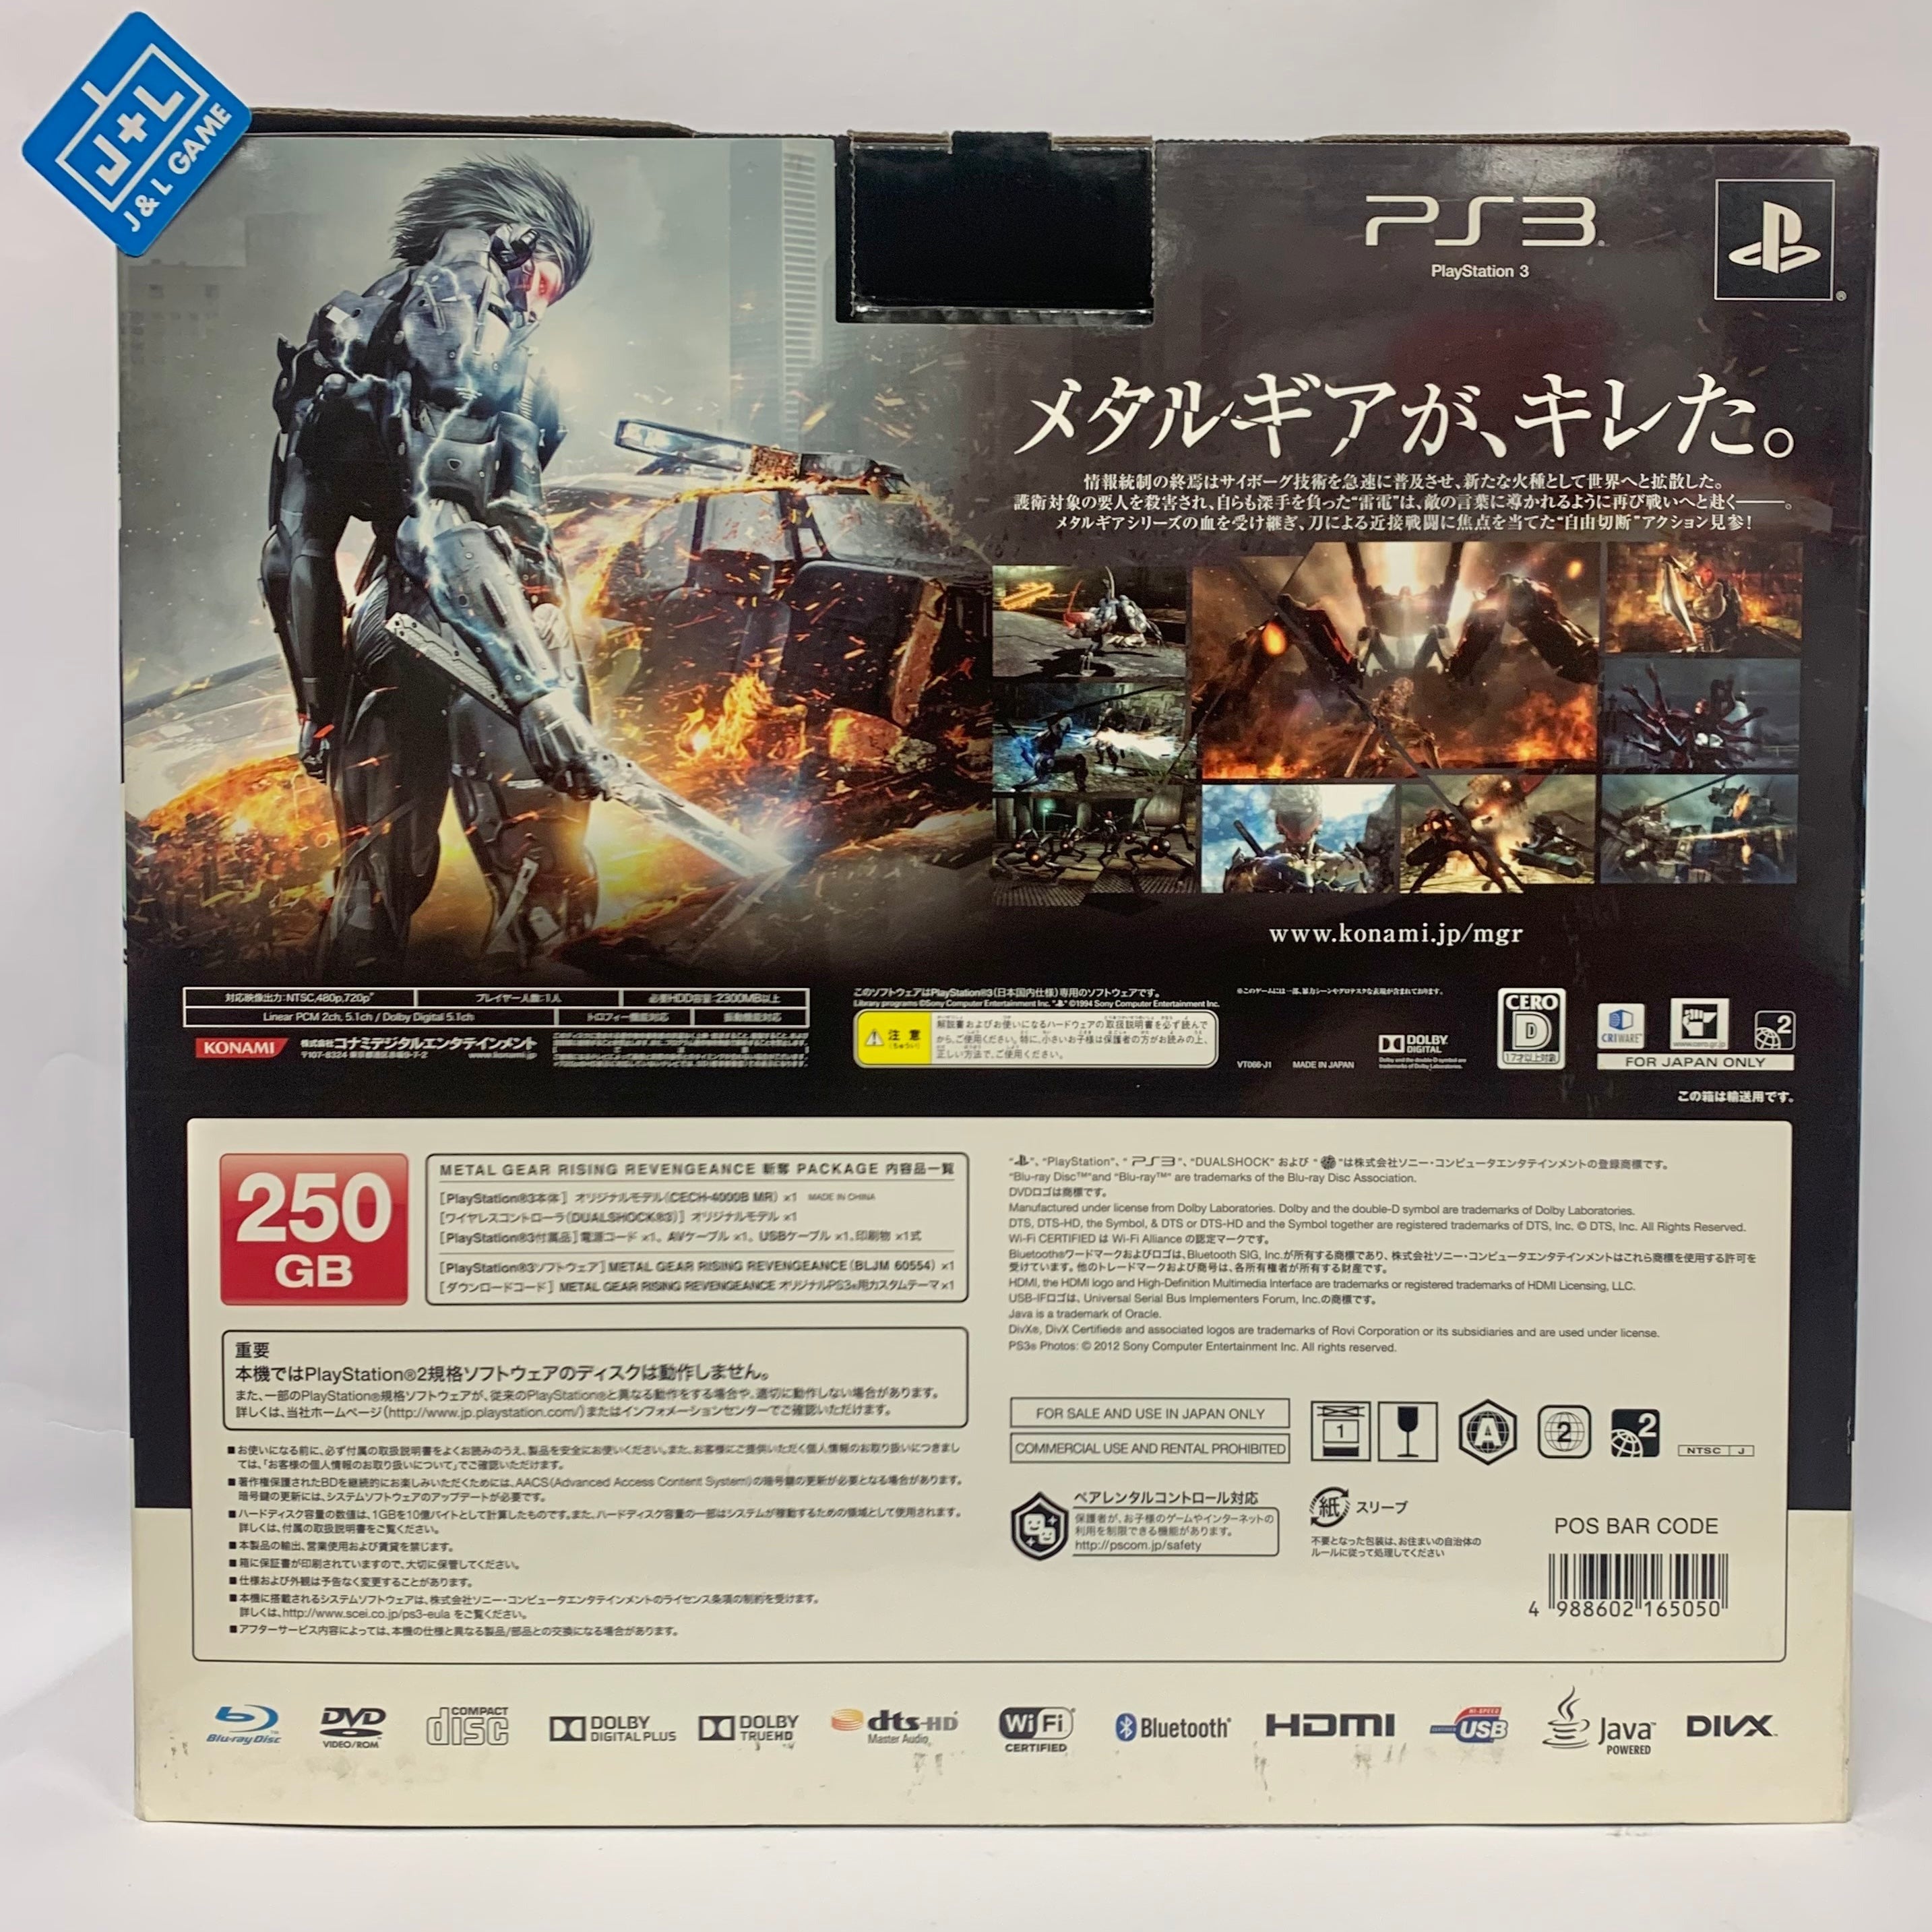 Sony PlayStation 3 Super Slim 250 GB Console Metal Gear Rising Revengeance  - (PS3) PlayStation 3 (Japanese Import) Consoles SONY   